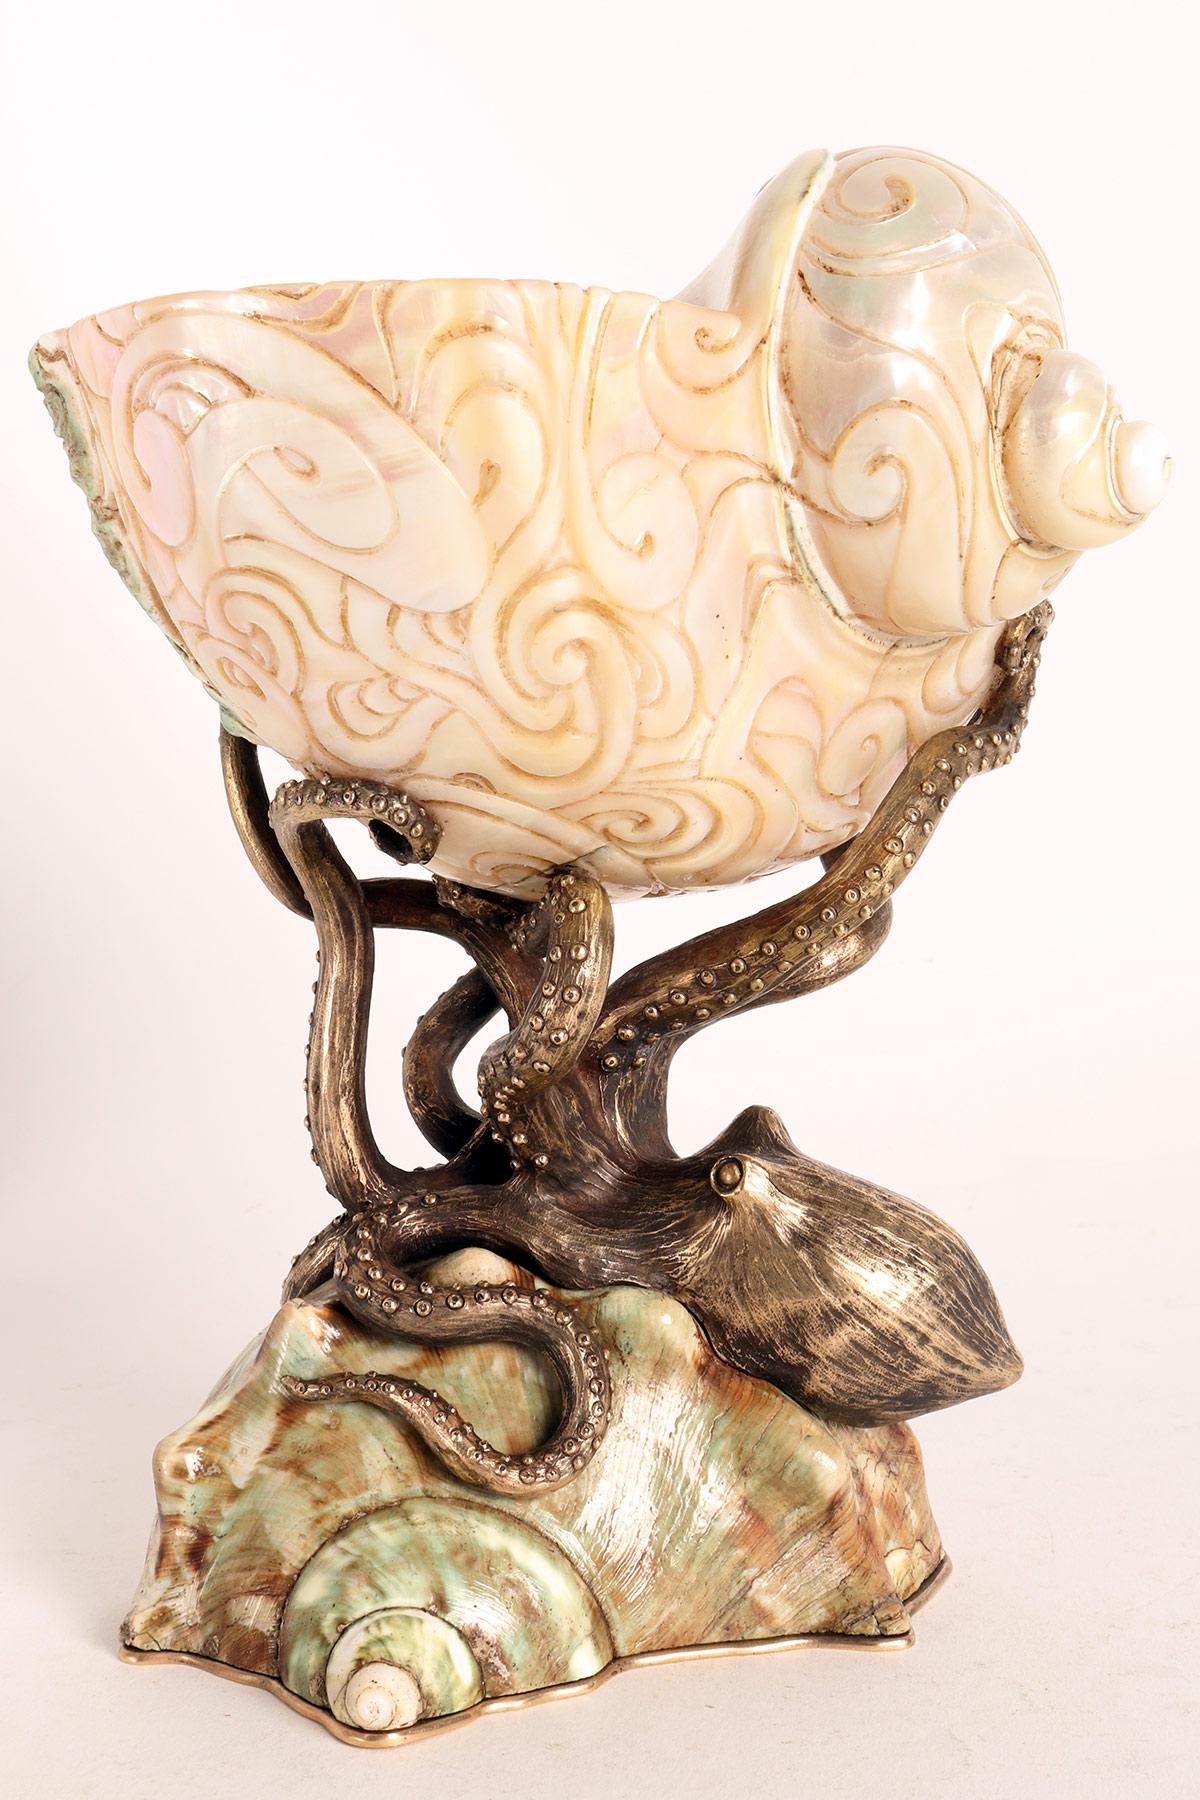 Bronze A cup with a shell of Turbo marmoratus, Germany 1870. 